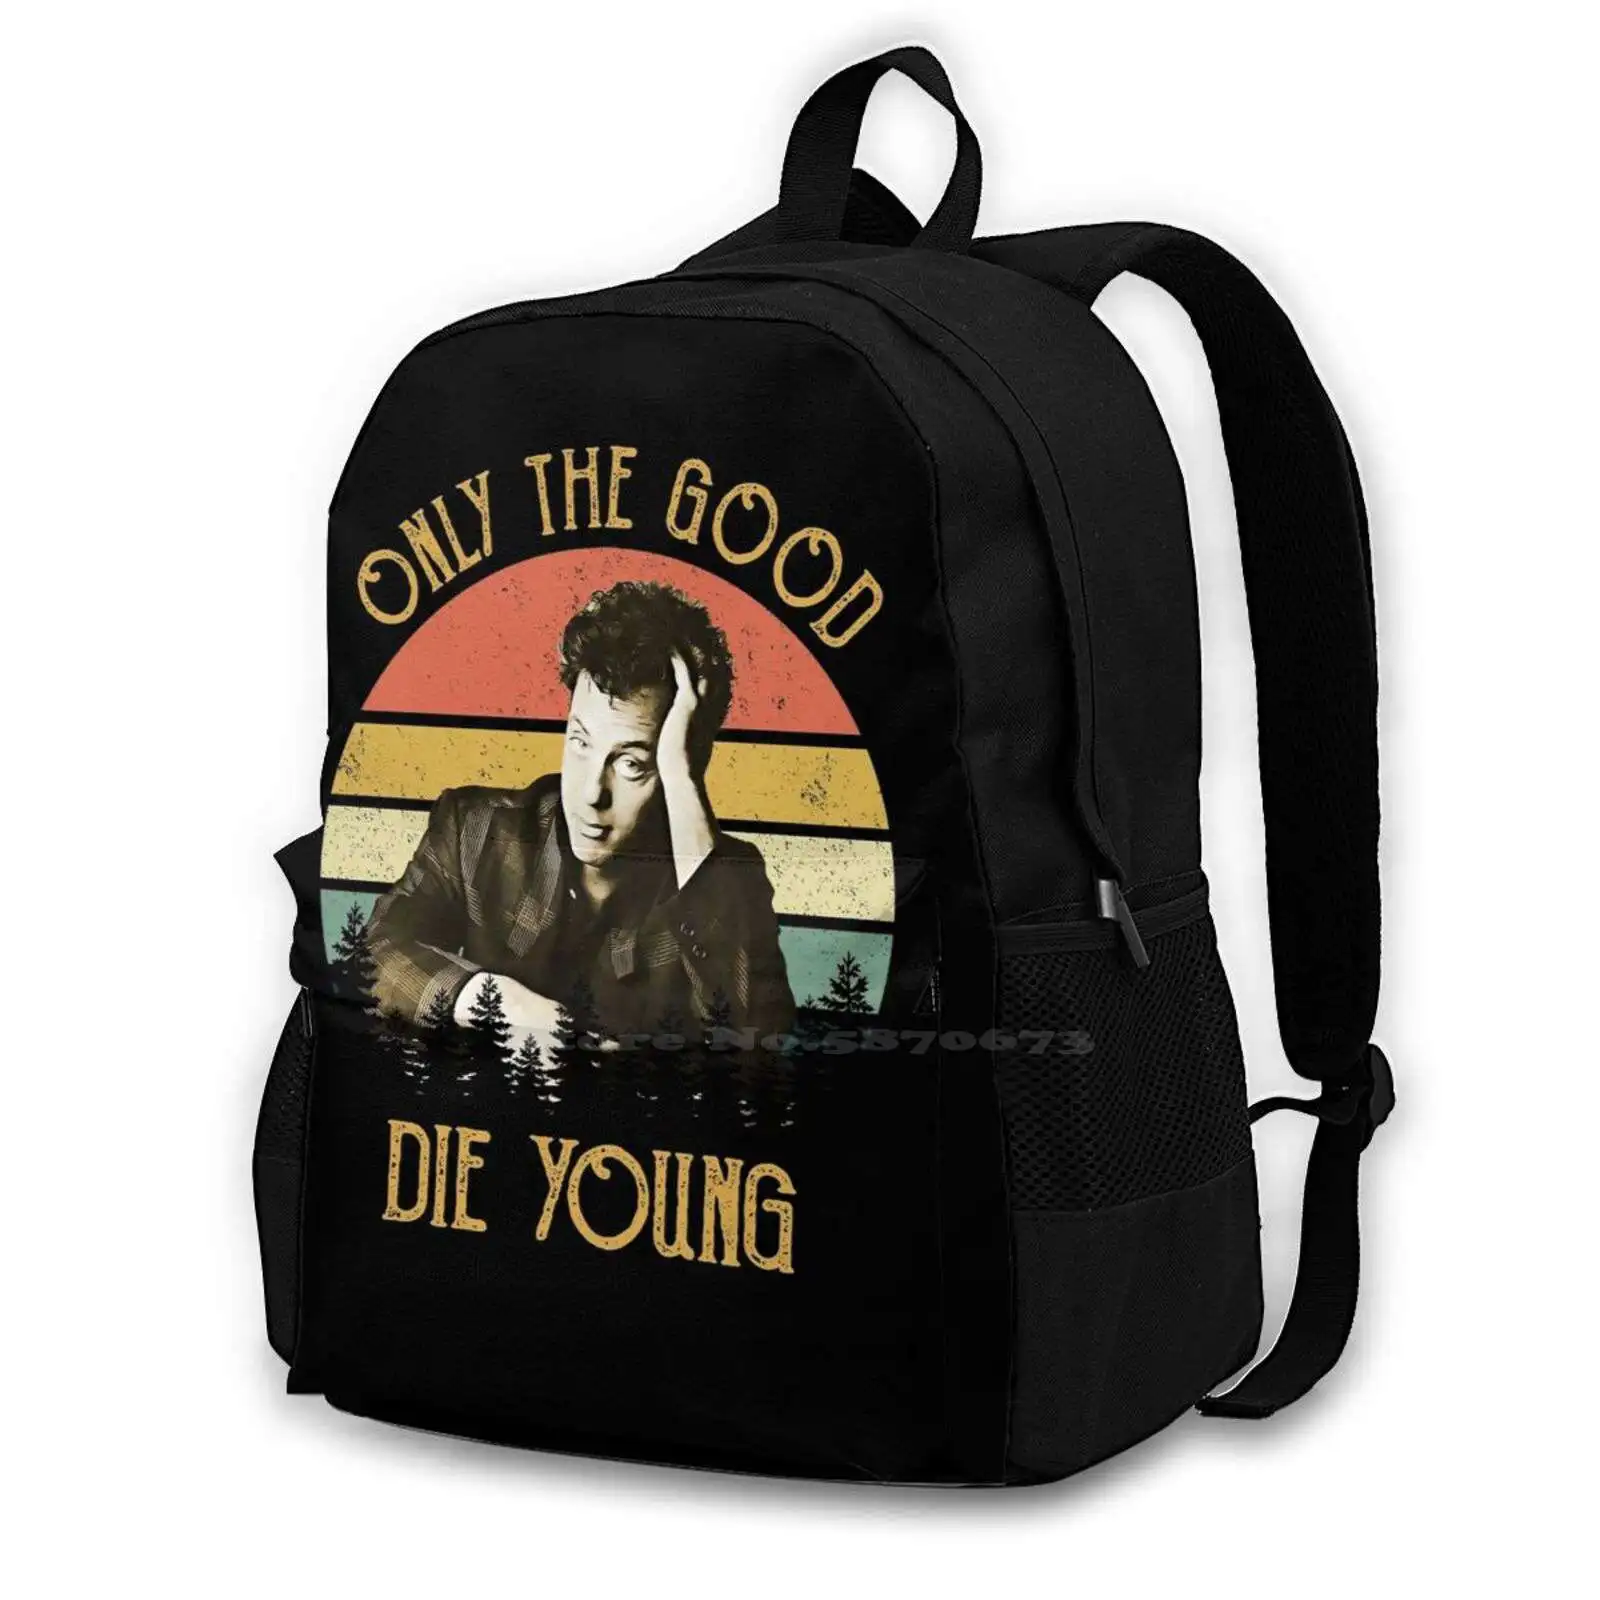 

Only The Good Die Young Billy Vintage Joel Retro Tees Teen College Student Backpack Laptop Travel Bags Billy Joel Upton Girl